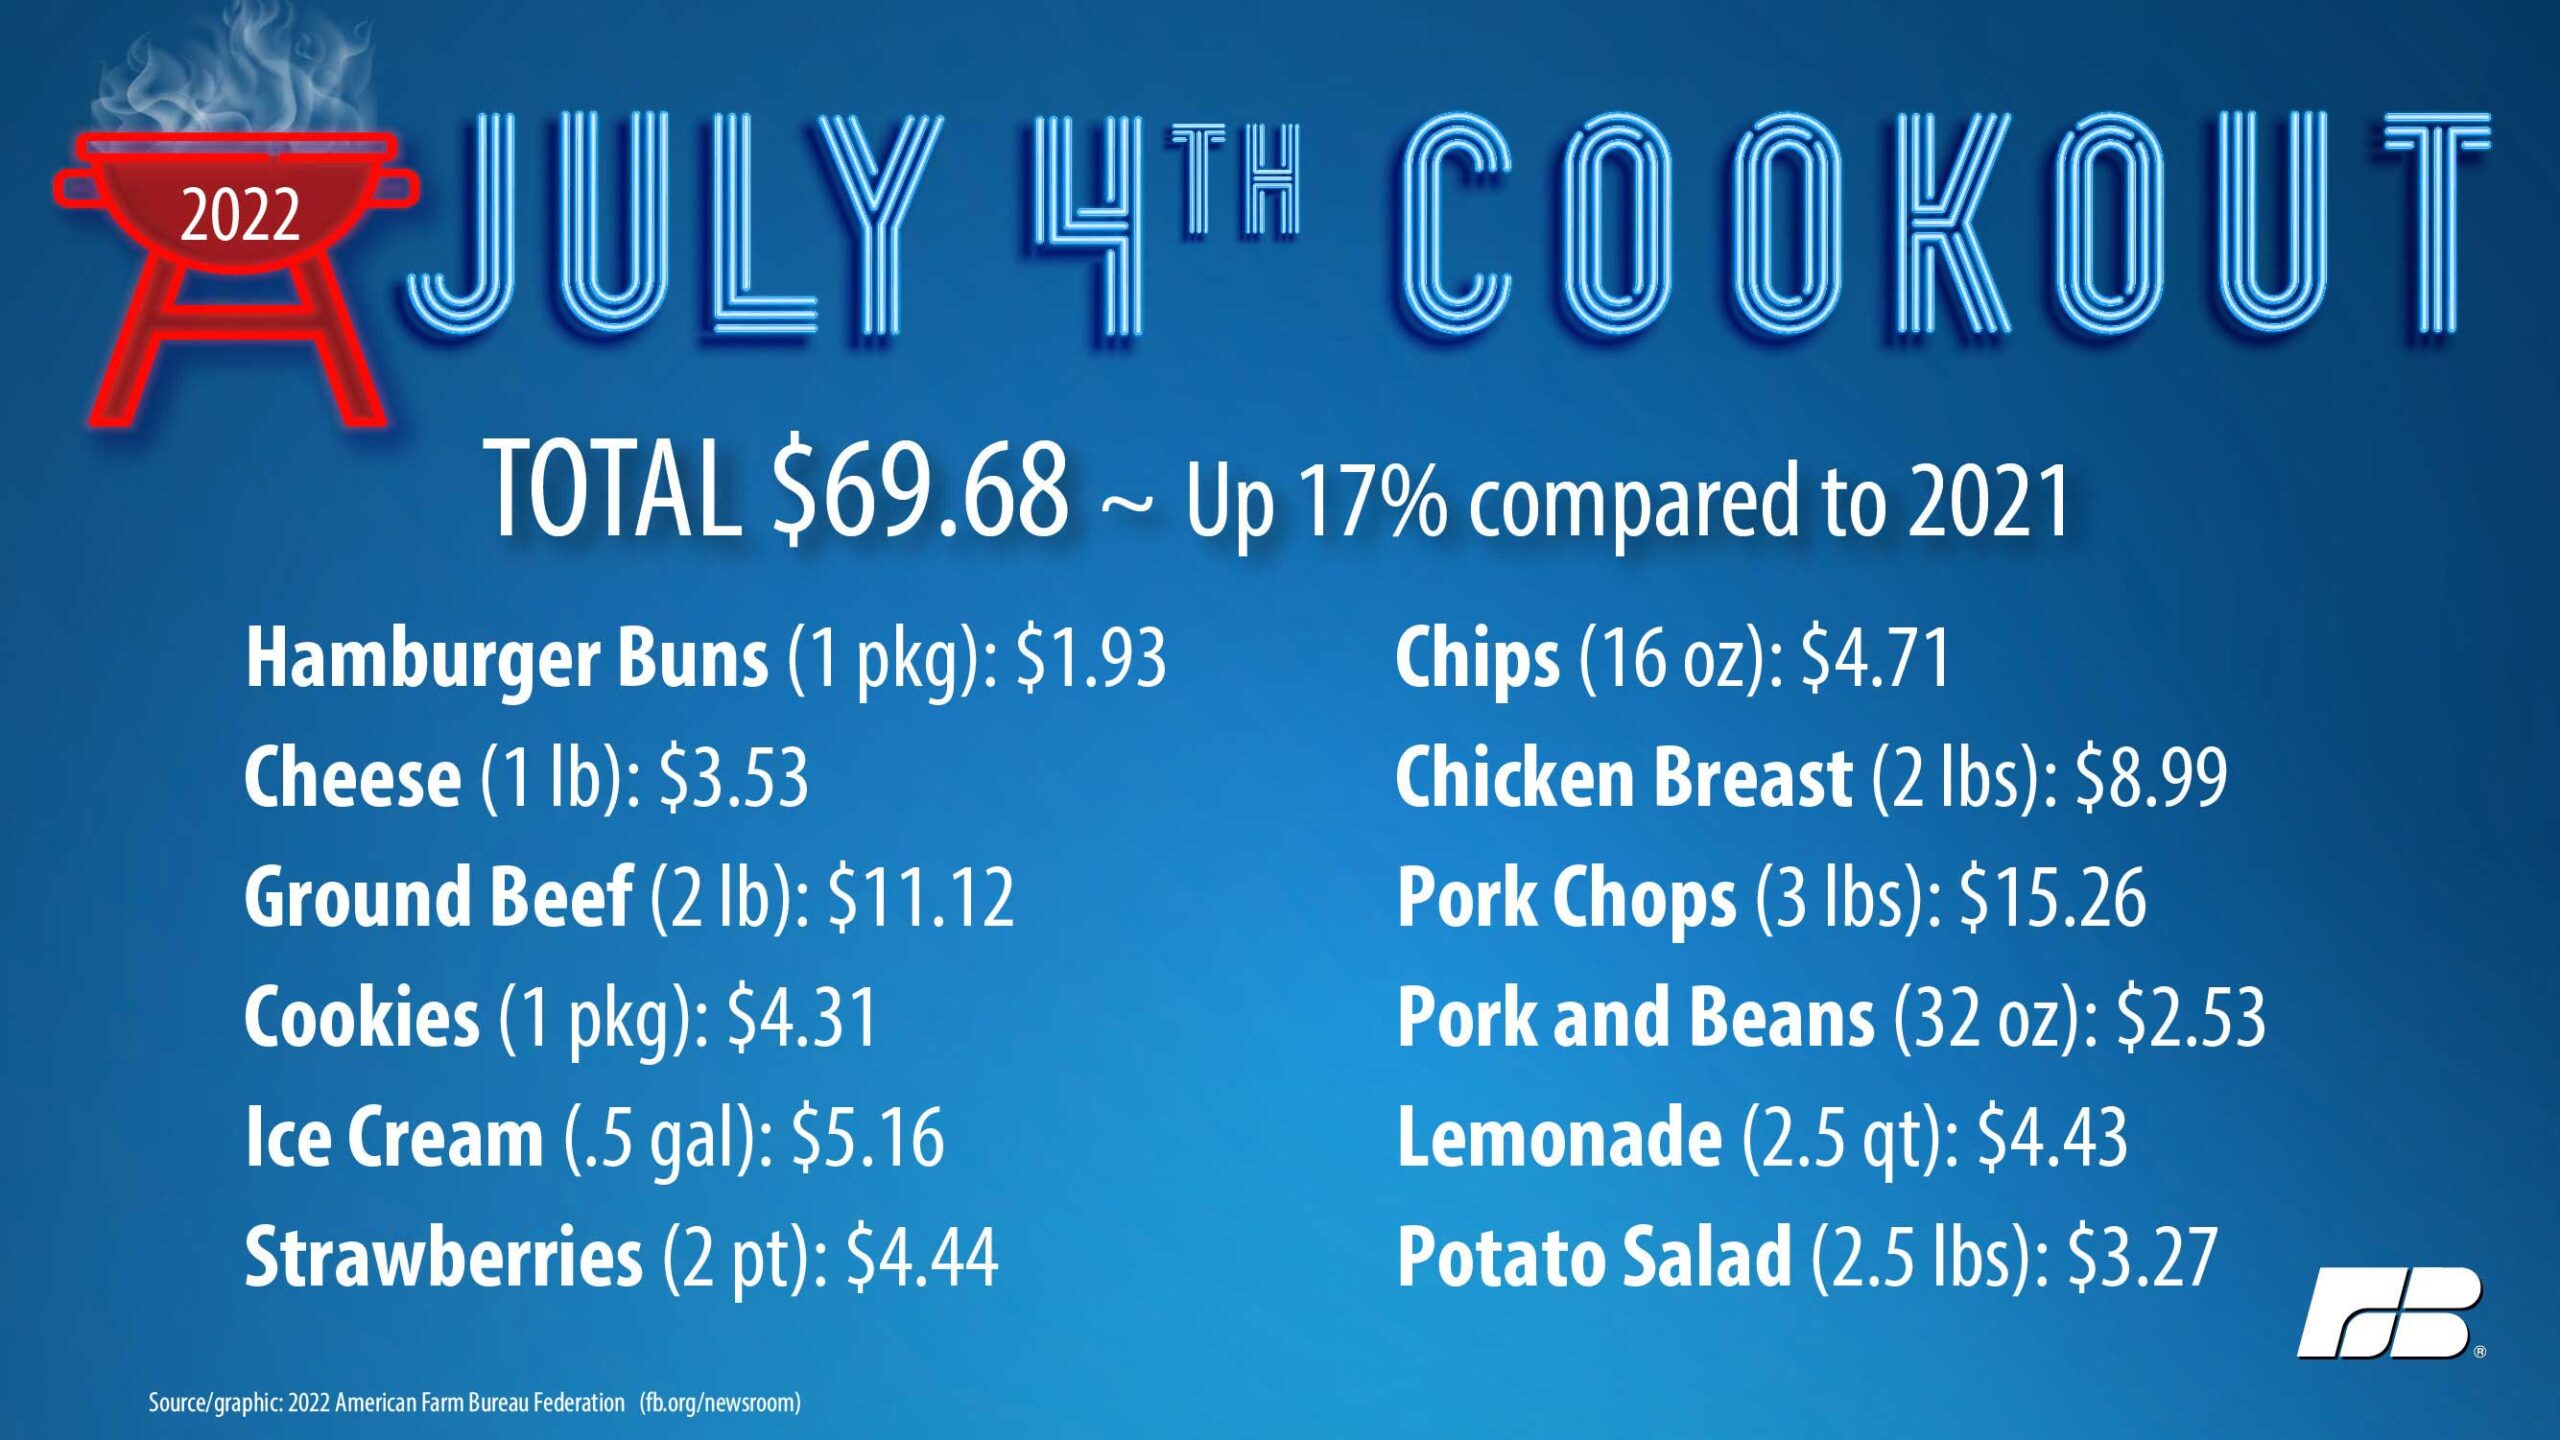 July 4th Cookout Cost